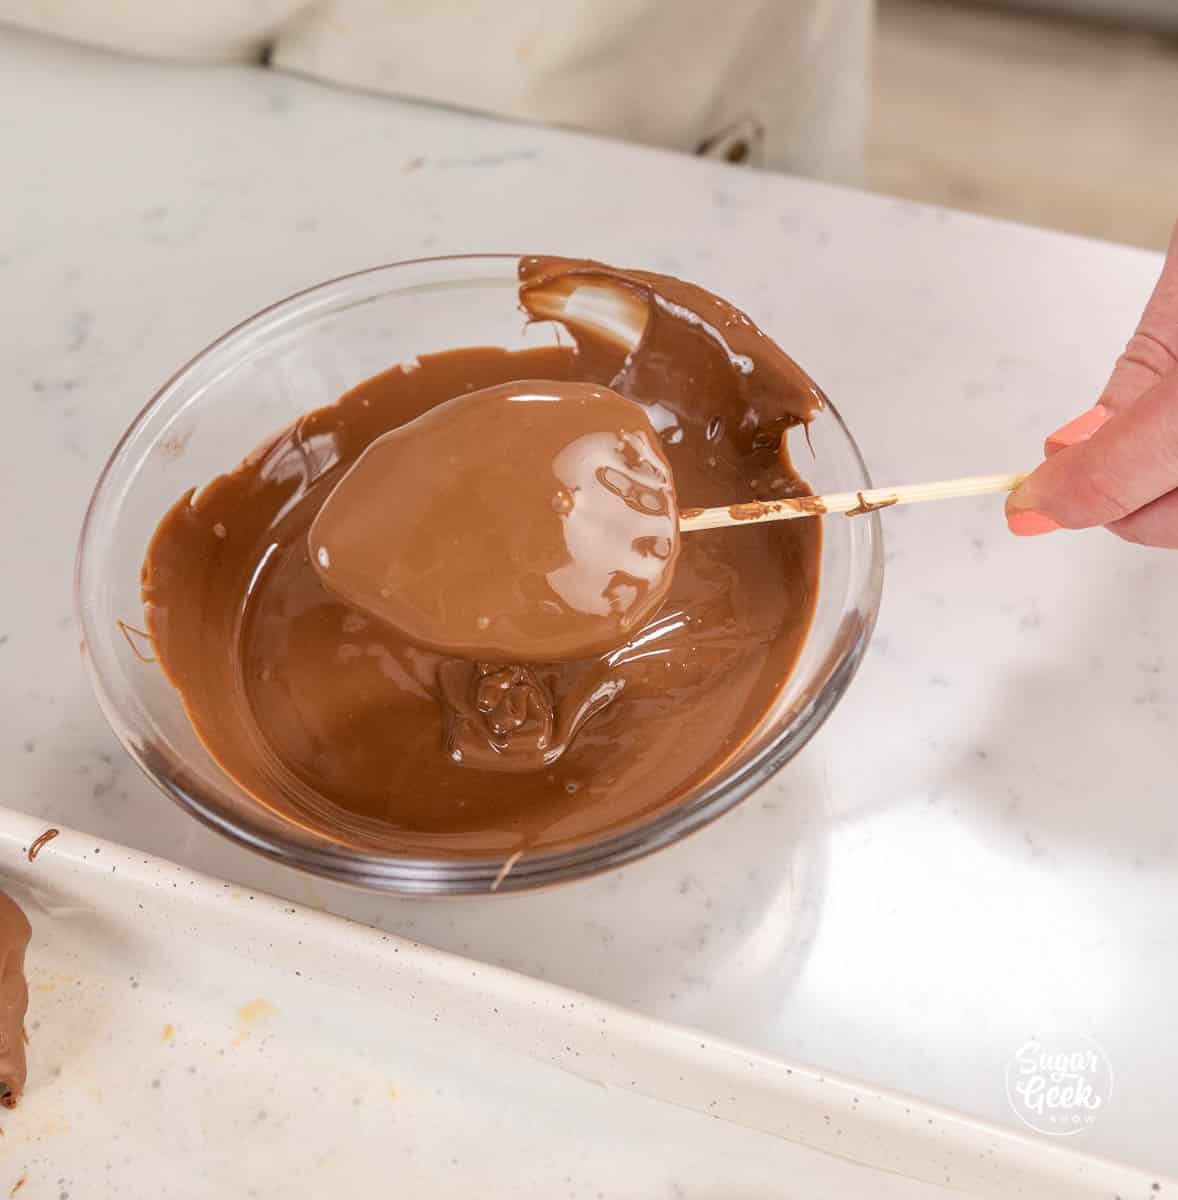 Dipping a peanut butter egg in chocolate with a skewer